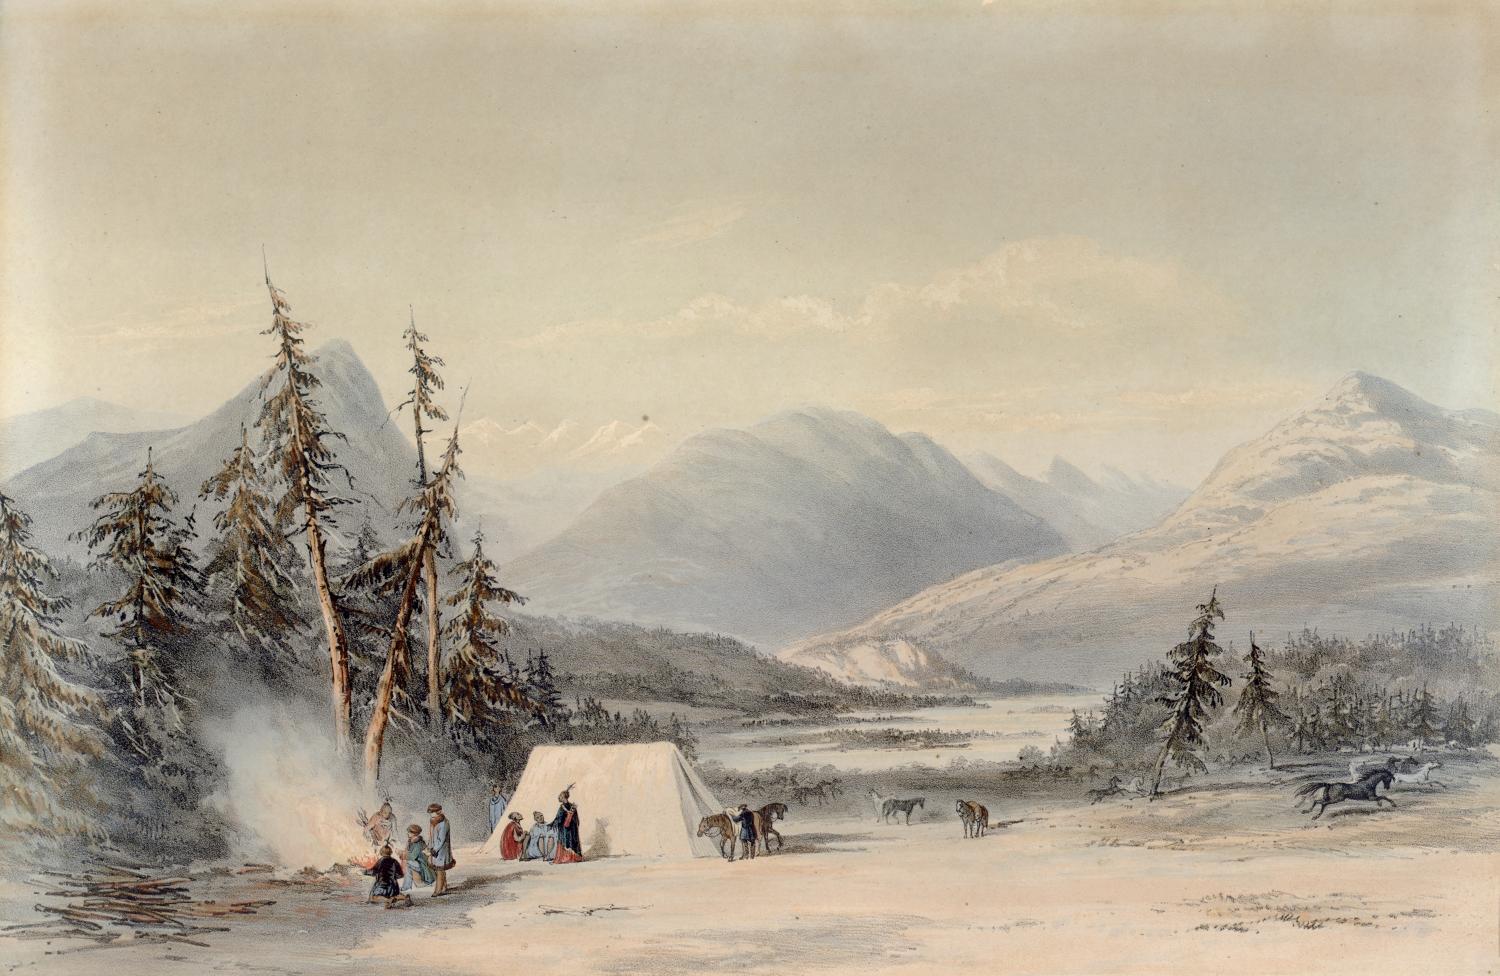 Painting of the Columbia River with the Rockies in the background and a tent with figures in the foreground